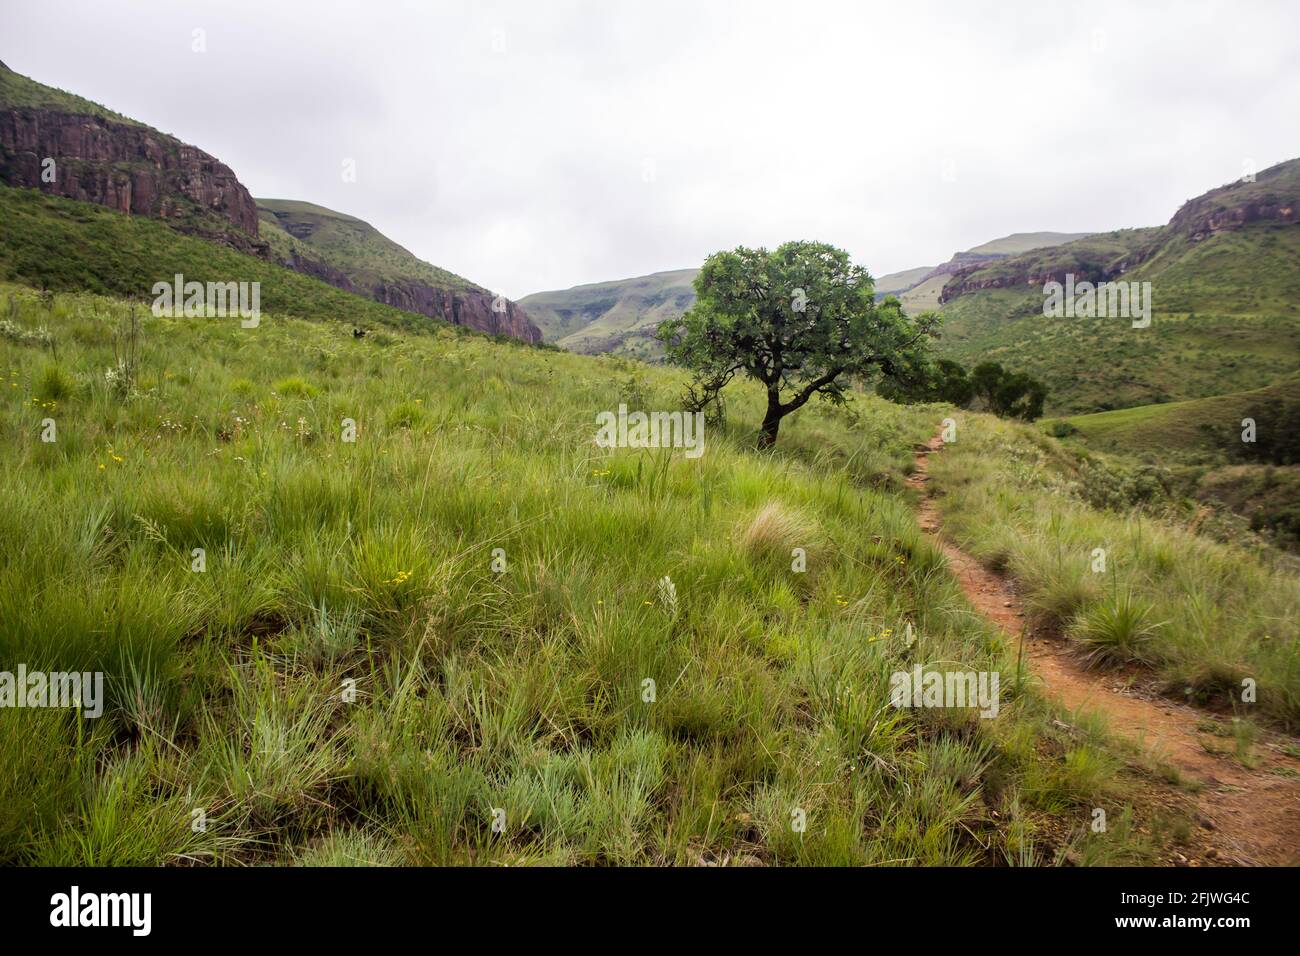 A small hiking trial, going through the Afromontane grassland of the Drakensberg Mountains of South Africa on an overcast day Stock Photo